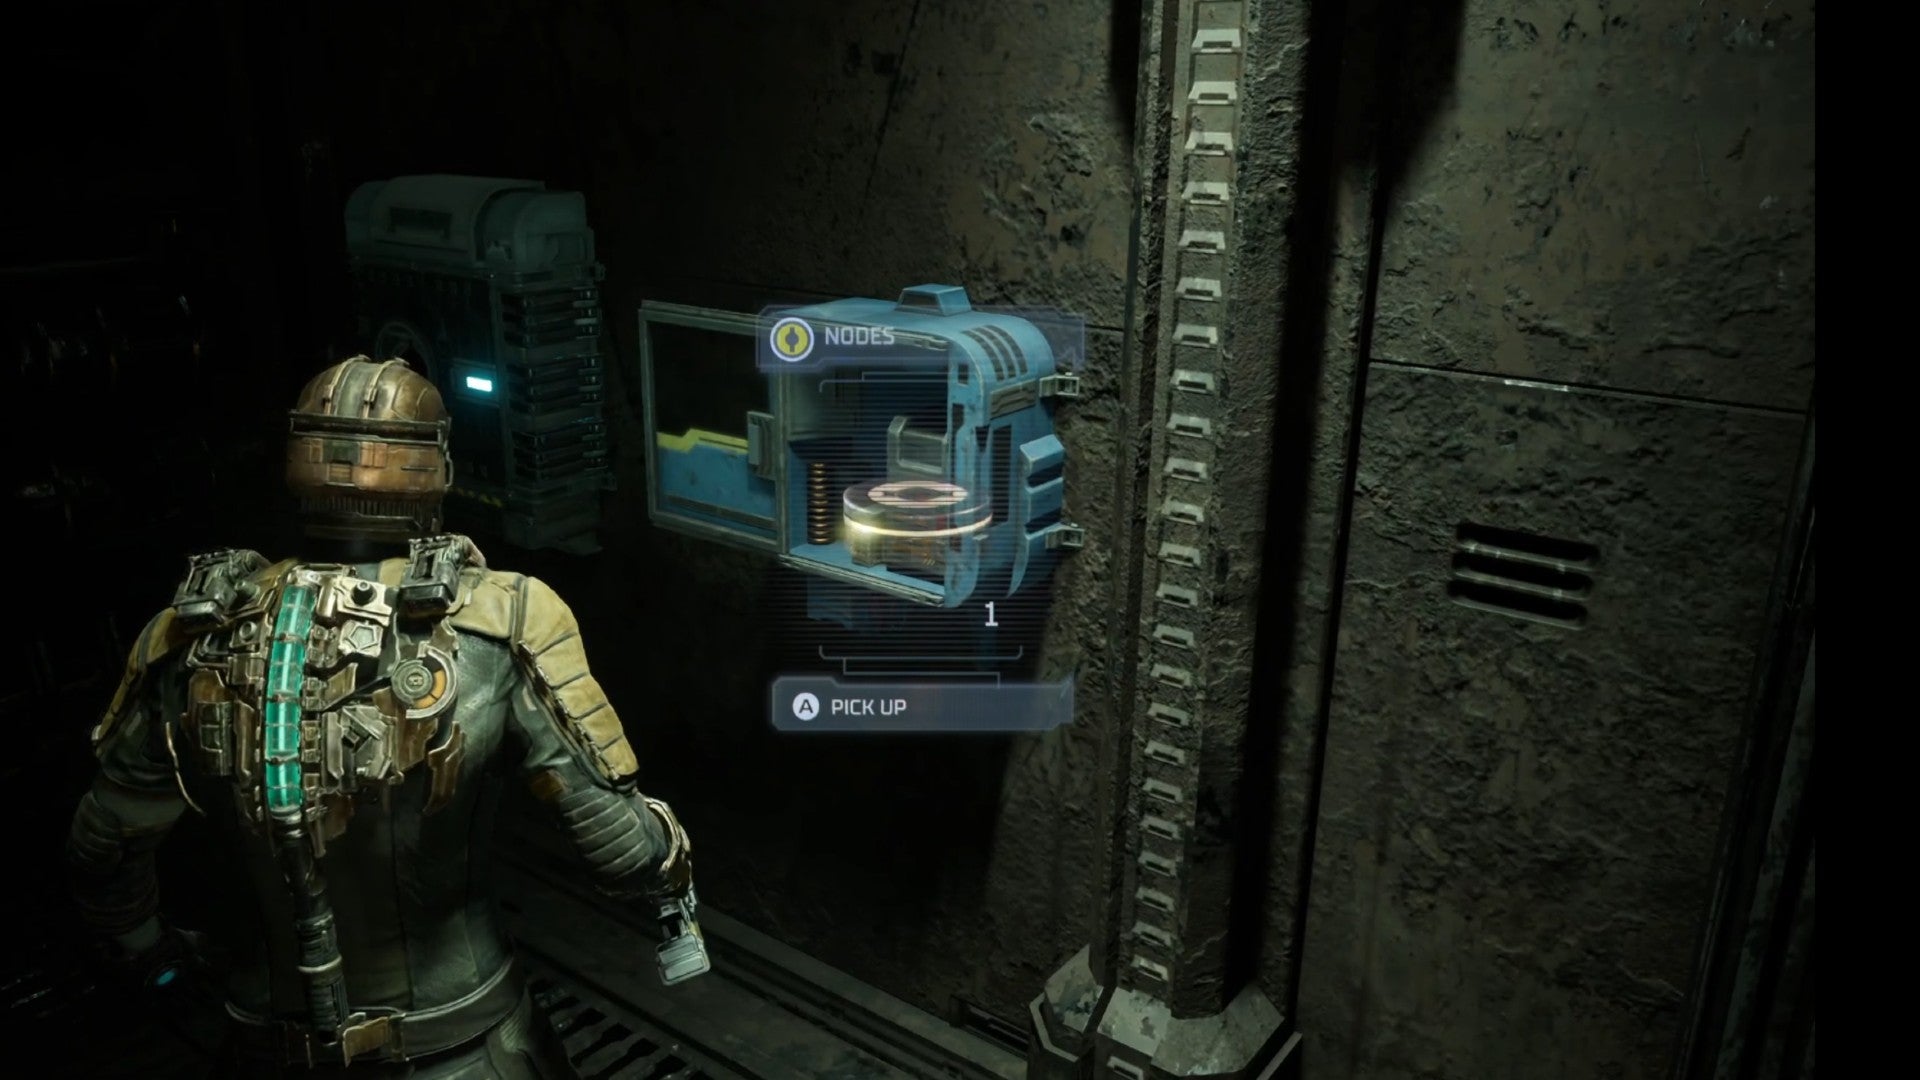 Dead Space image showing a Power Node in a container, with Isaac stood nearby.